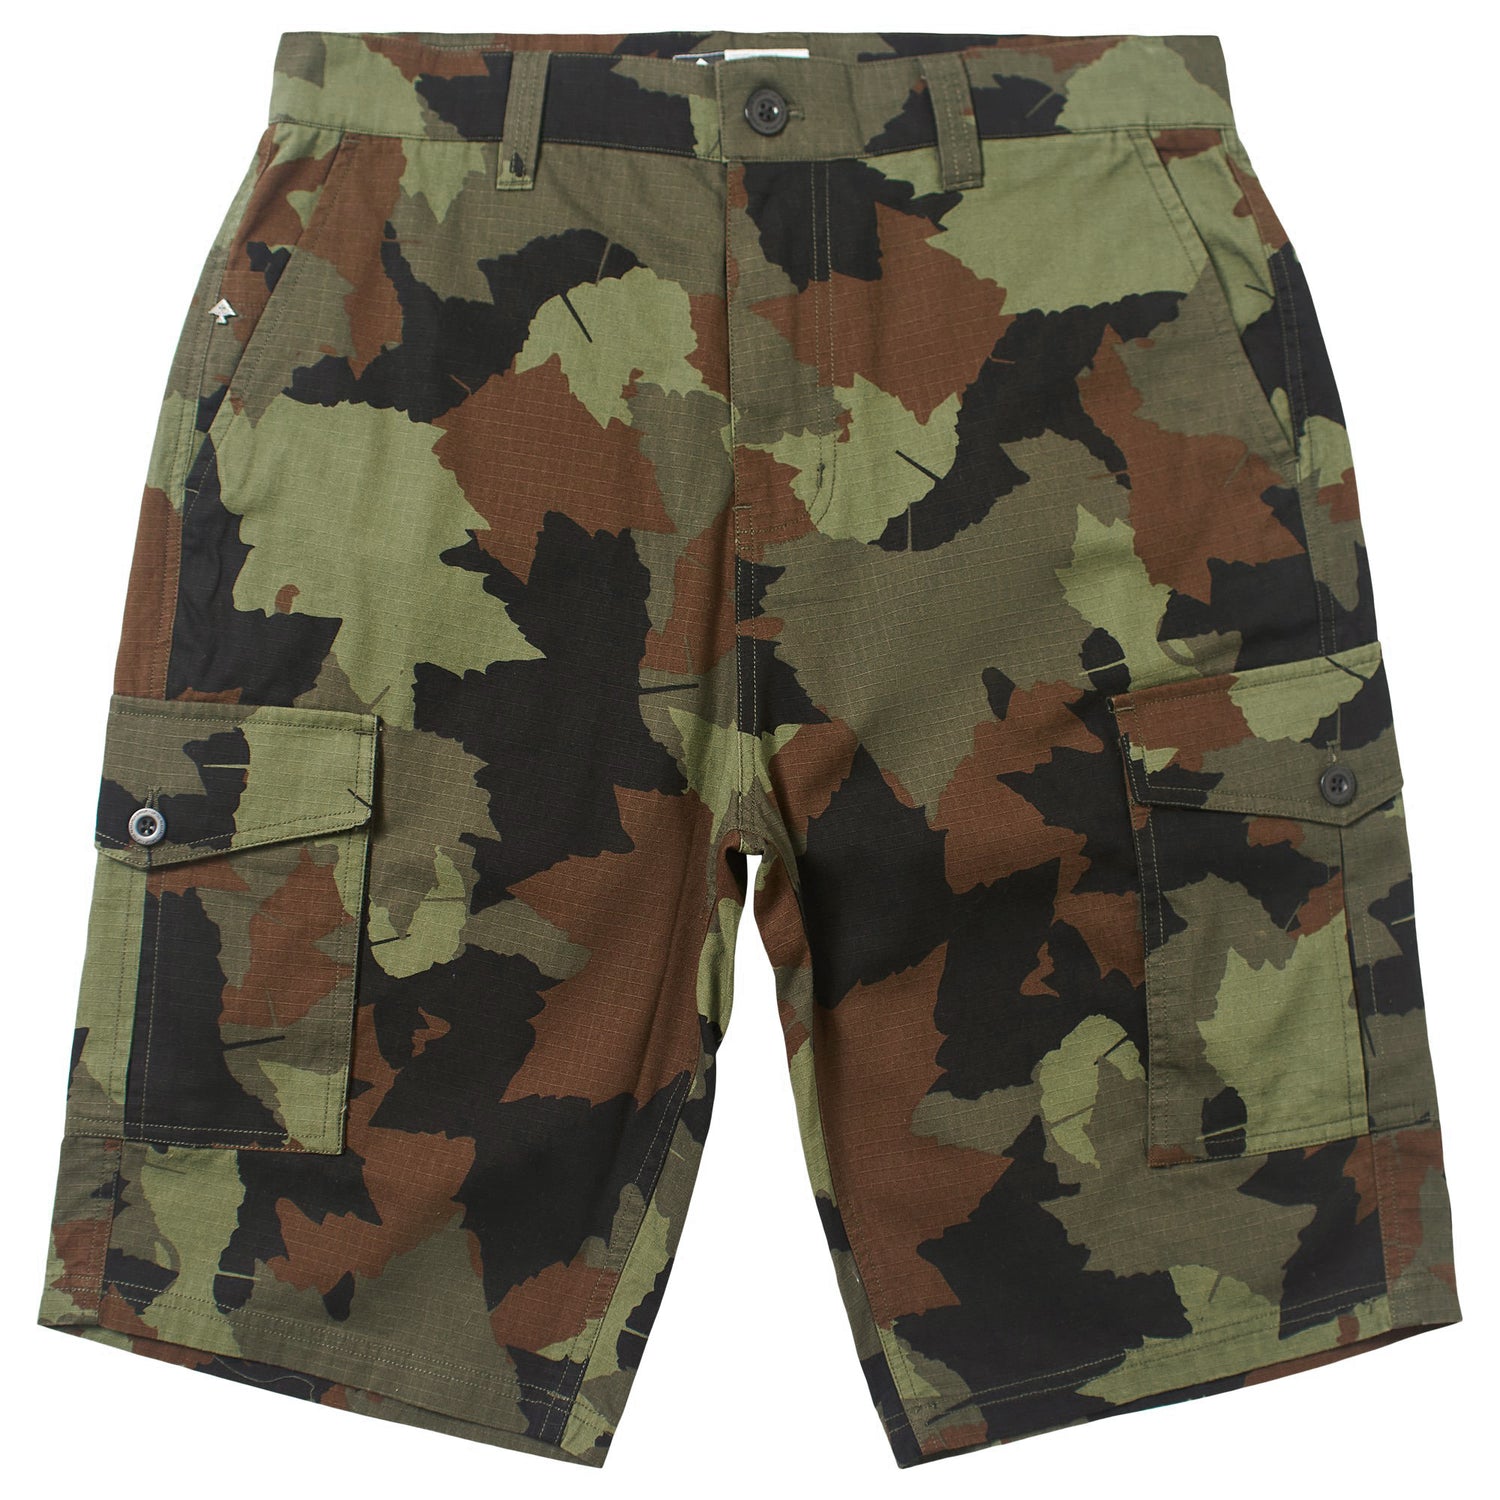 Reel Legends Cargo Shorts Men's Size 36 (8.25 in) Green Camouflage 100%  Cotton